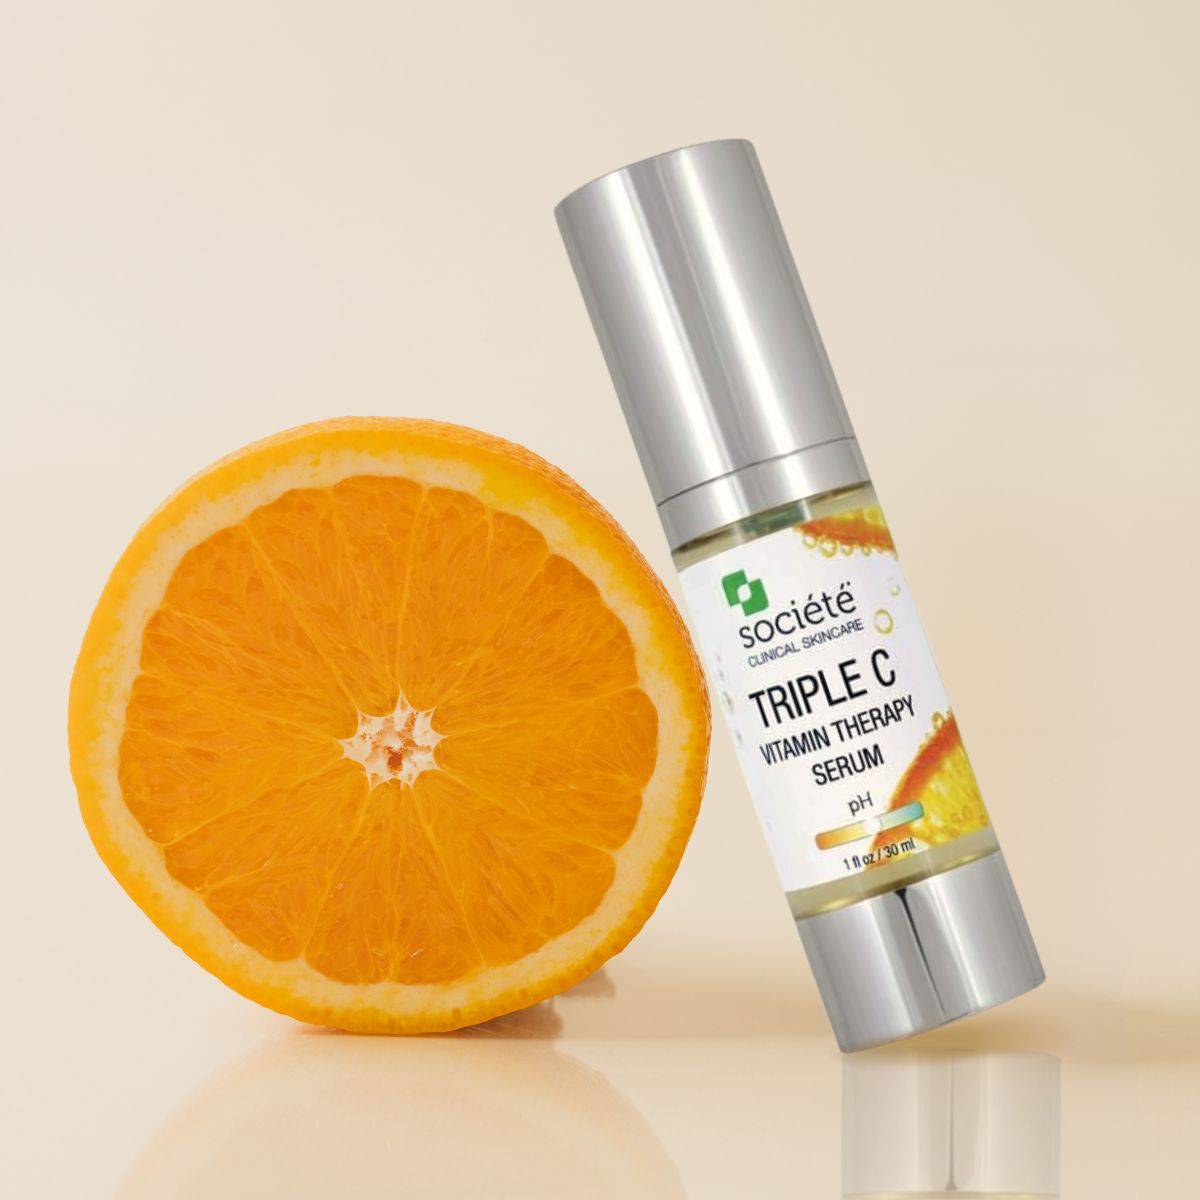 Societe Triple C Vitamin Therapy Serum image laying next to an orange on a beige background